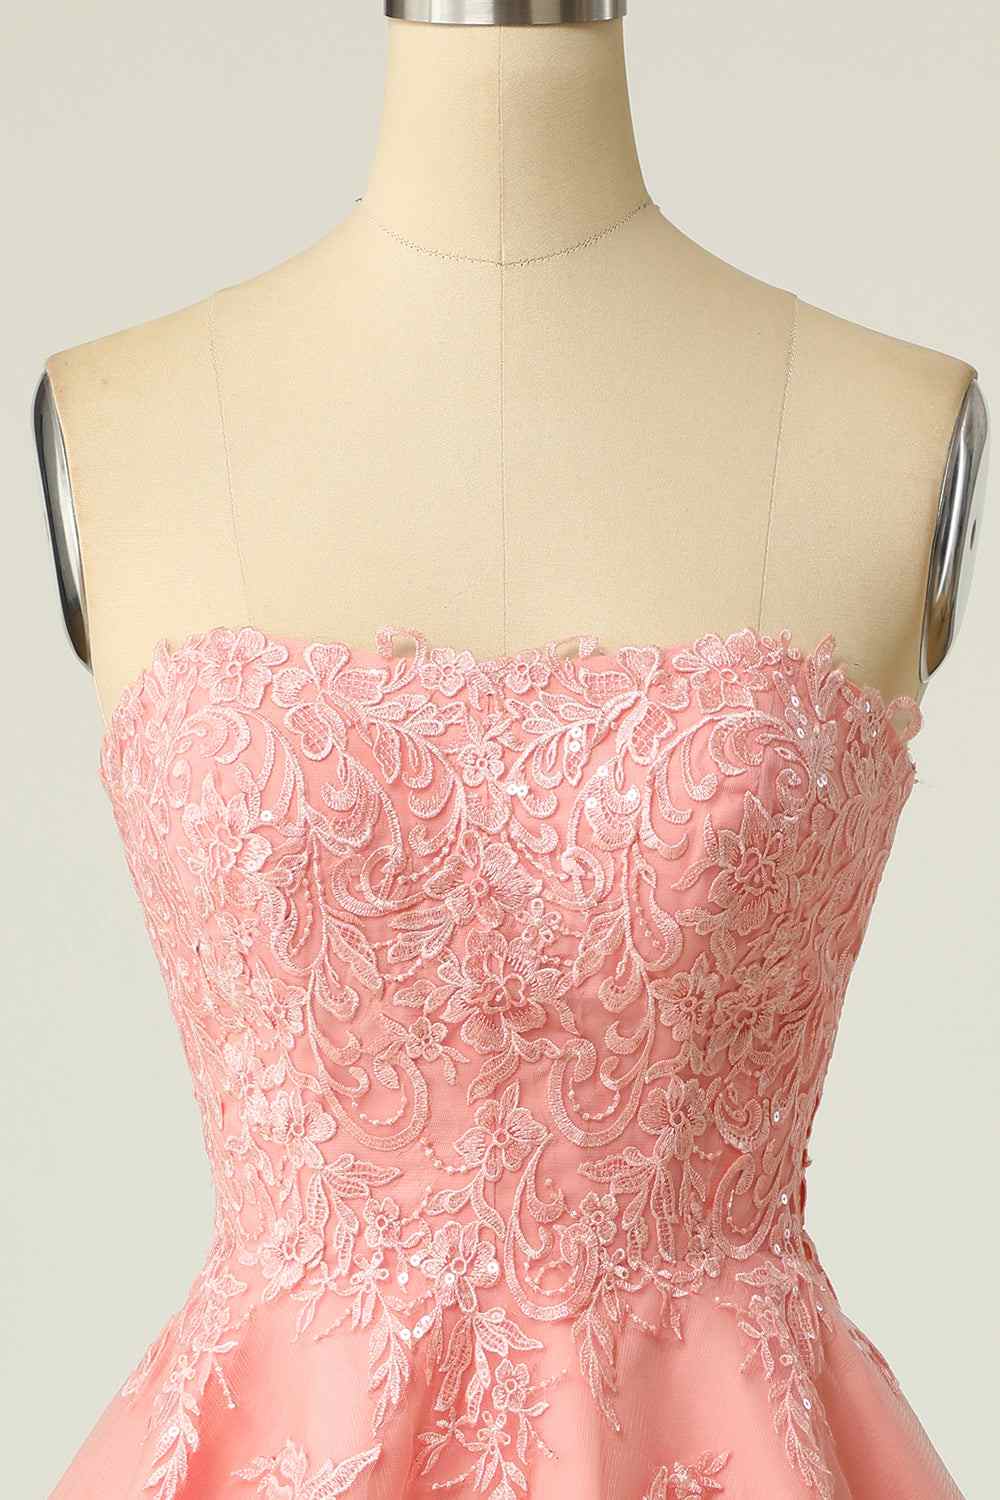 Pink A-line Strapless Lace-Up Back Applique Tulle Mini Homecoming Dress